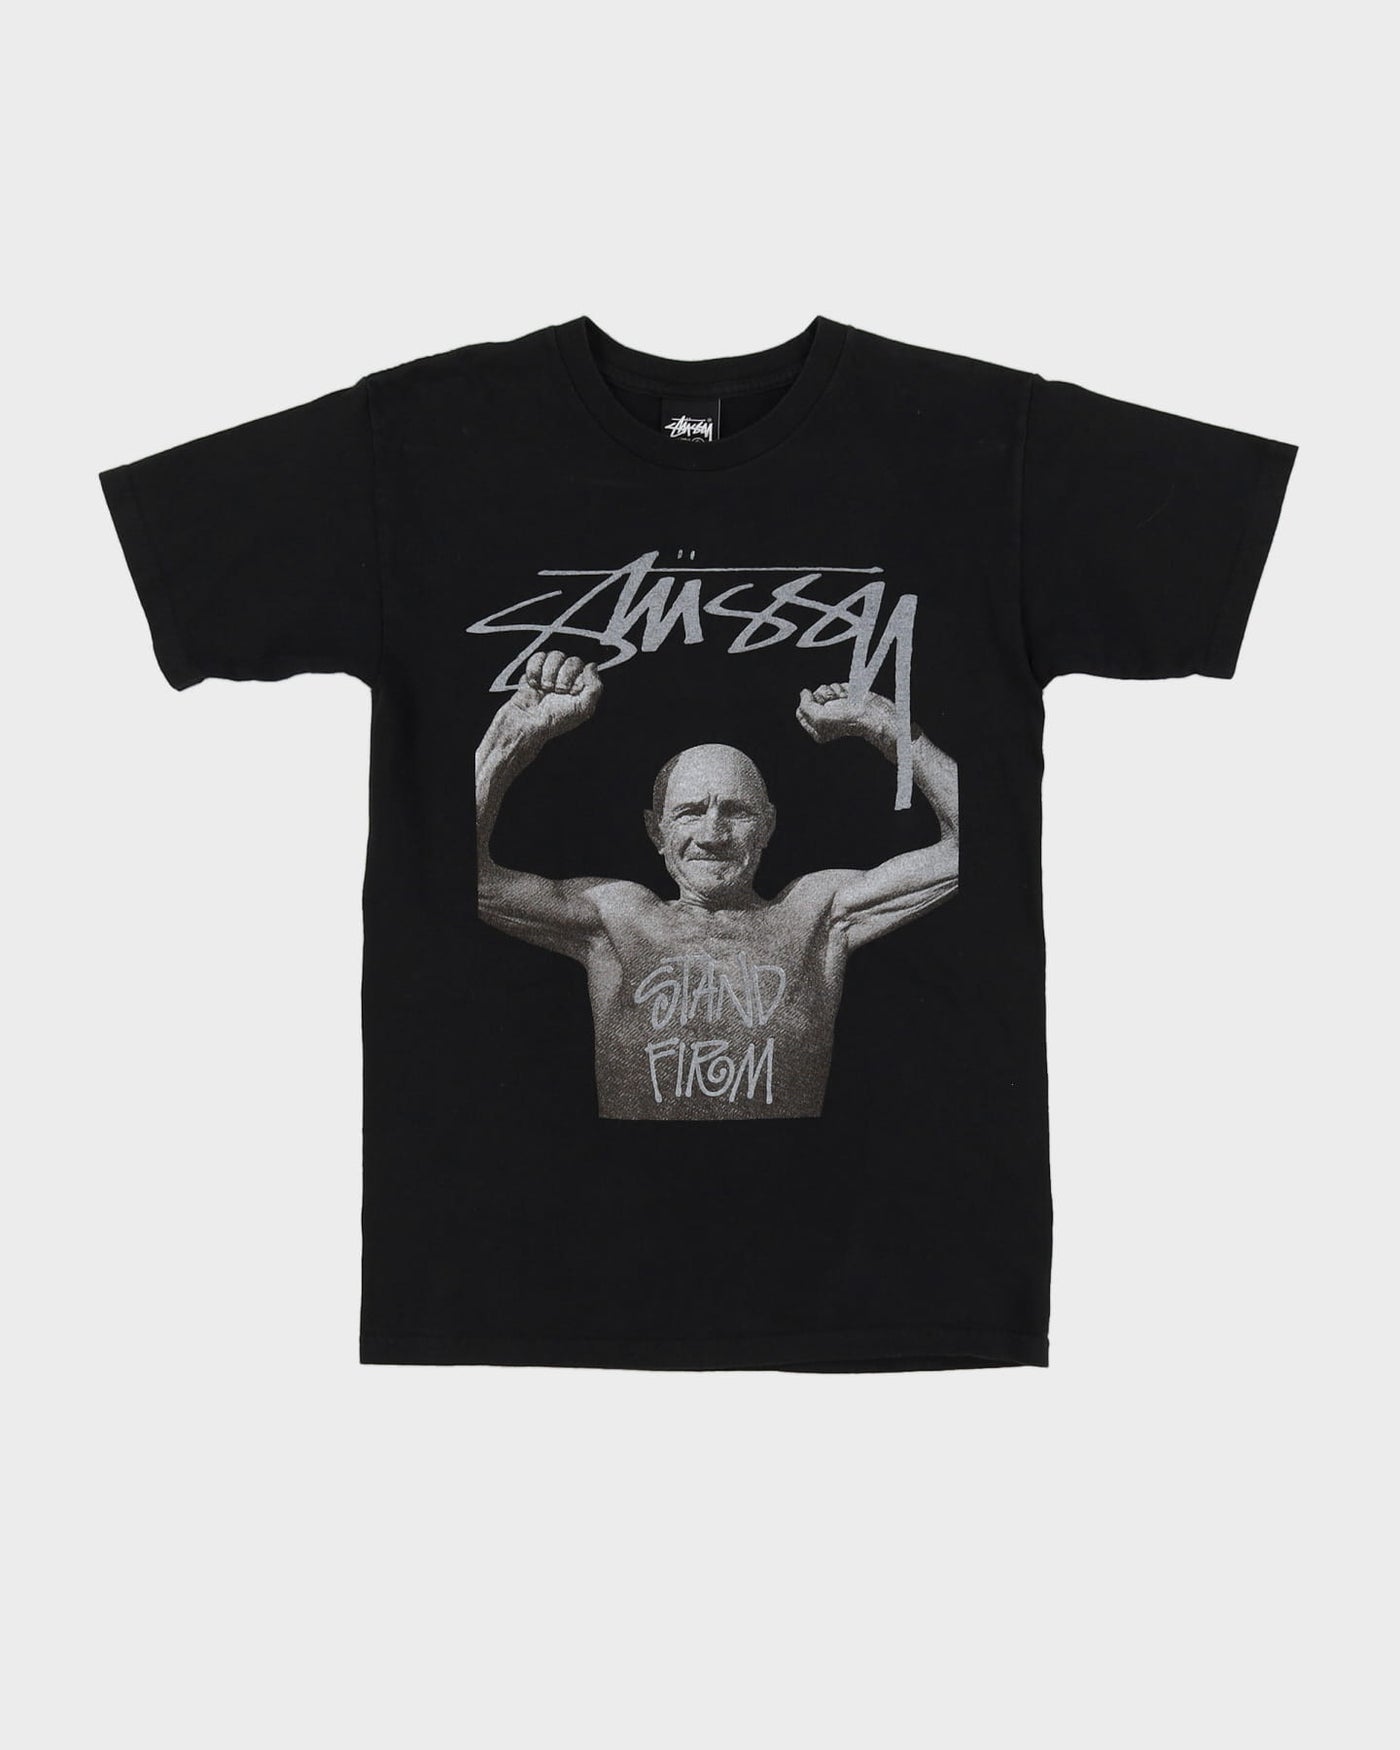 00s Stussy Stand Firm Black T-Shirt - S